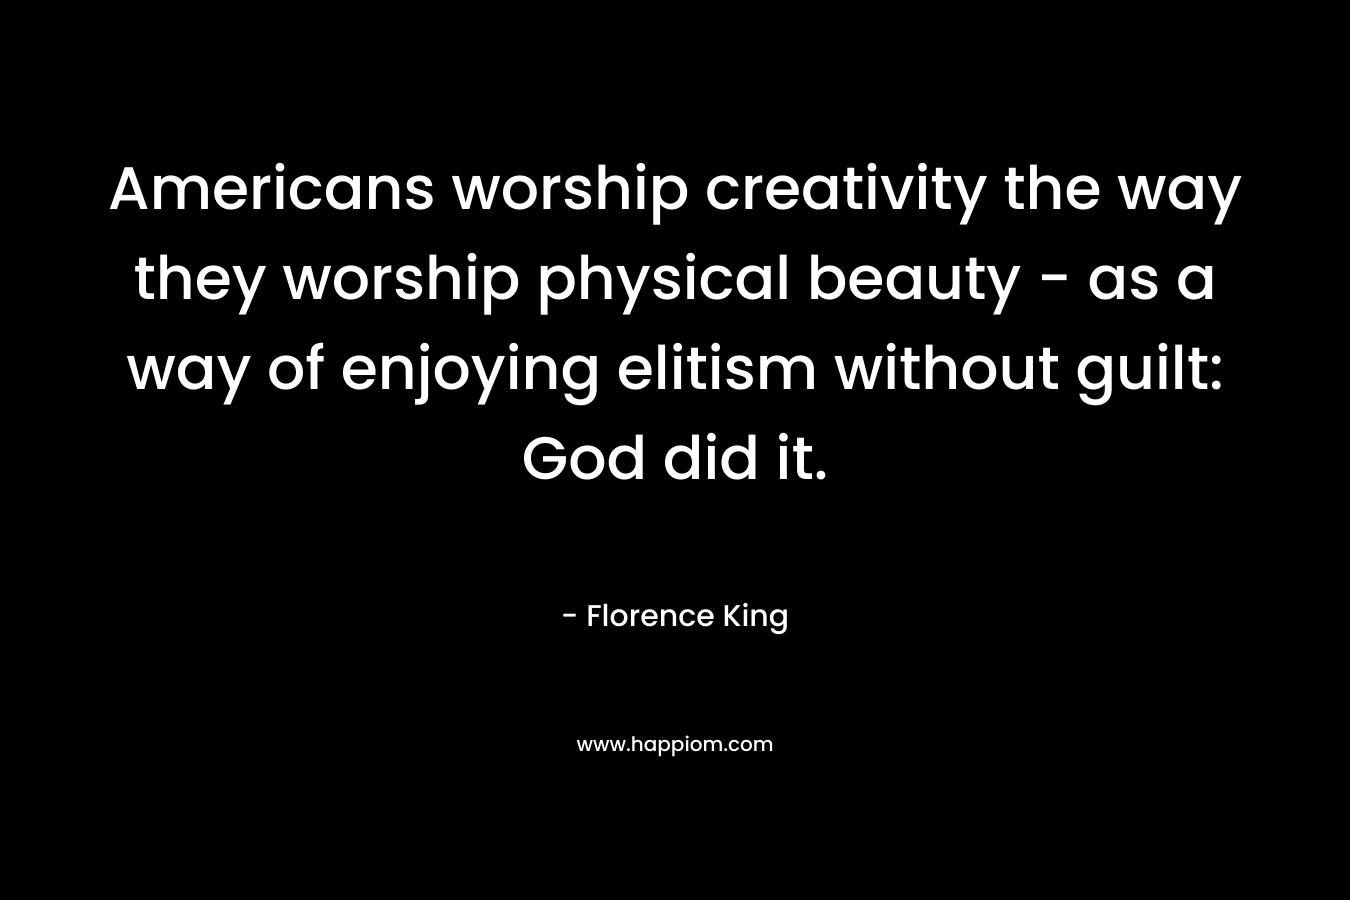 Americans worship creativity the way they worship physical beauty - as a way of enjoying elitism without guilt: God did it.